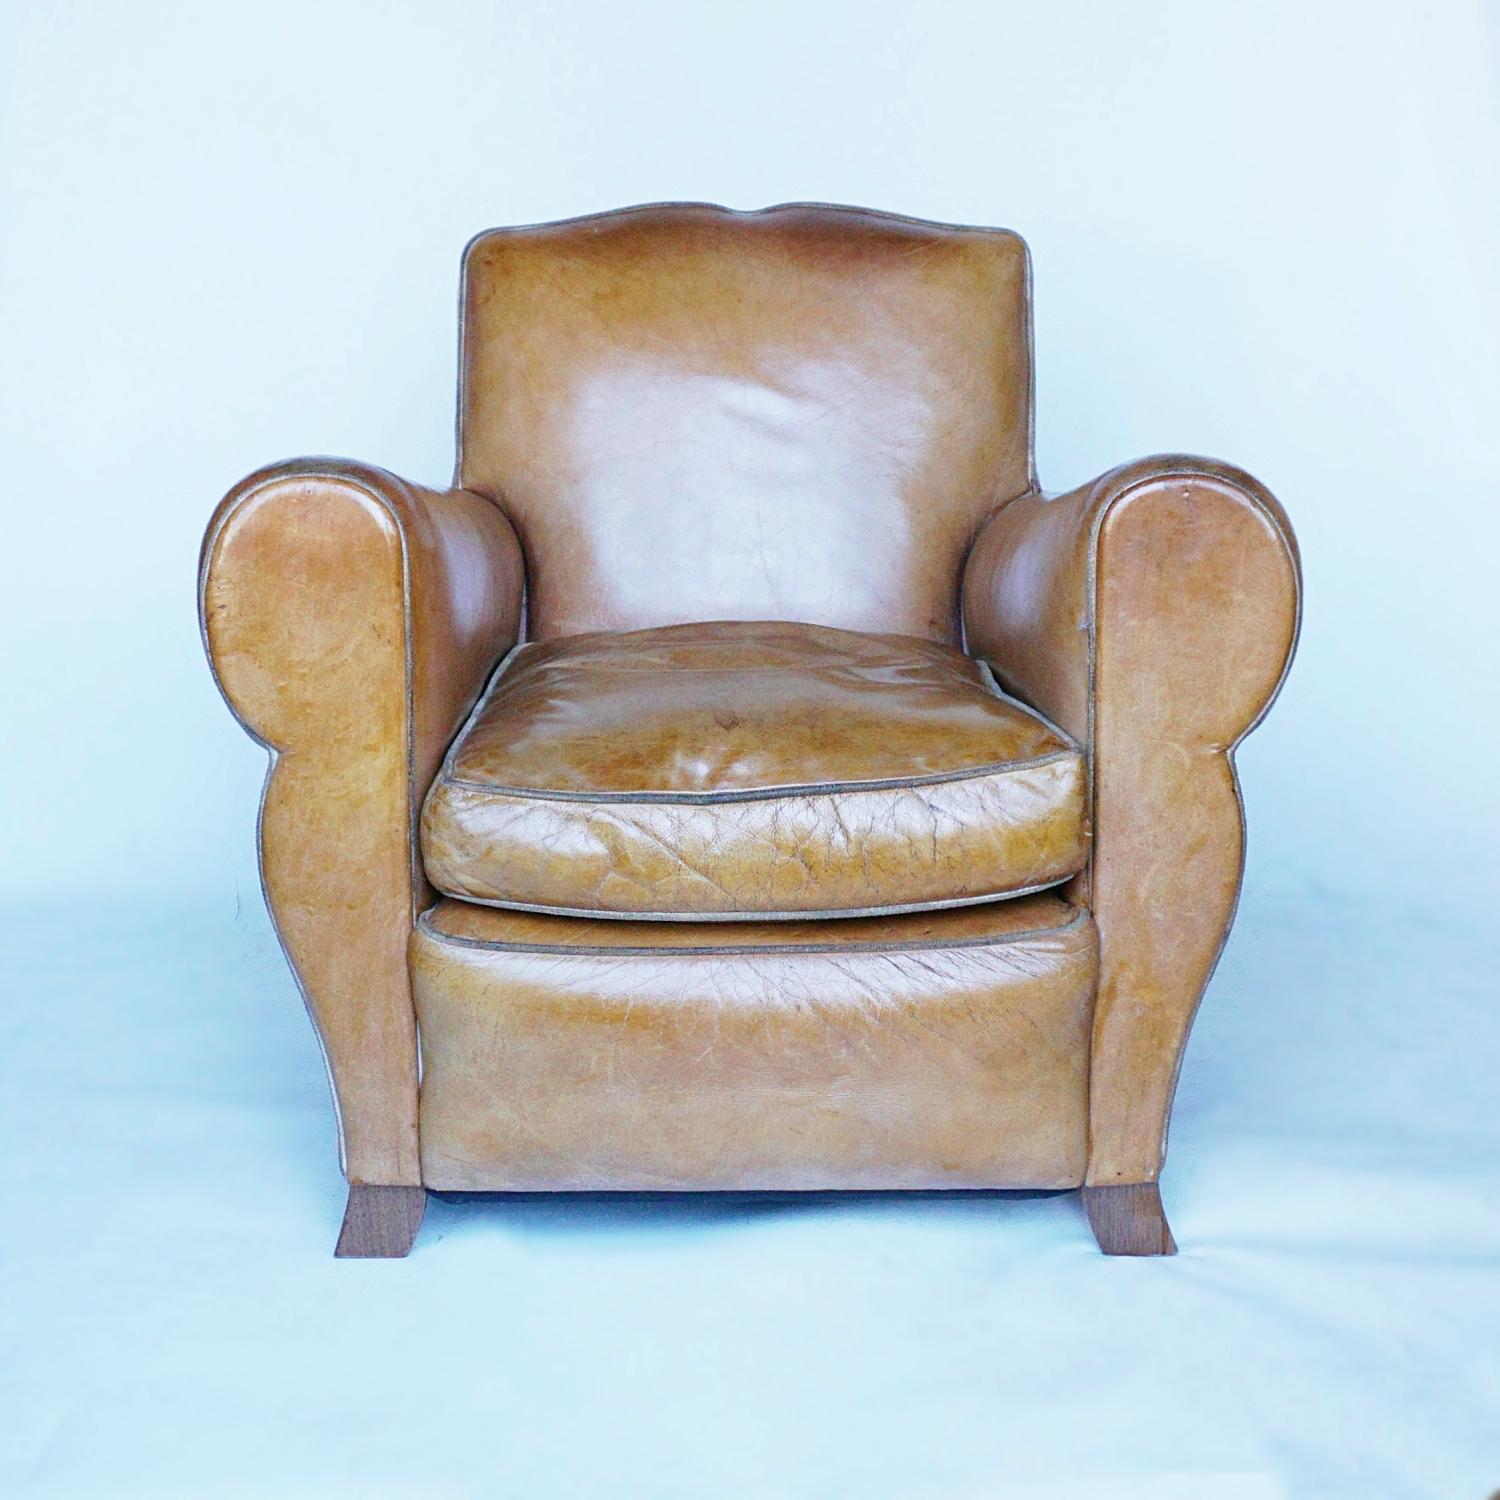 Pair of French Art Deco Club chairs. Moustache backed with curved shaped legs. Upholstered in brown leather. 

Dimensions: H 72cm W 79cm D 64cm Seat H 40cm 

Origin: French

Date: Circa 1940

Item Number: 212212.